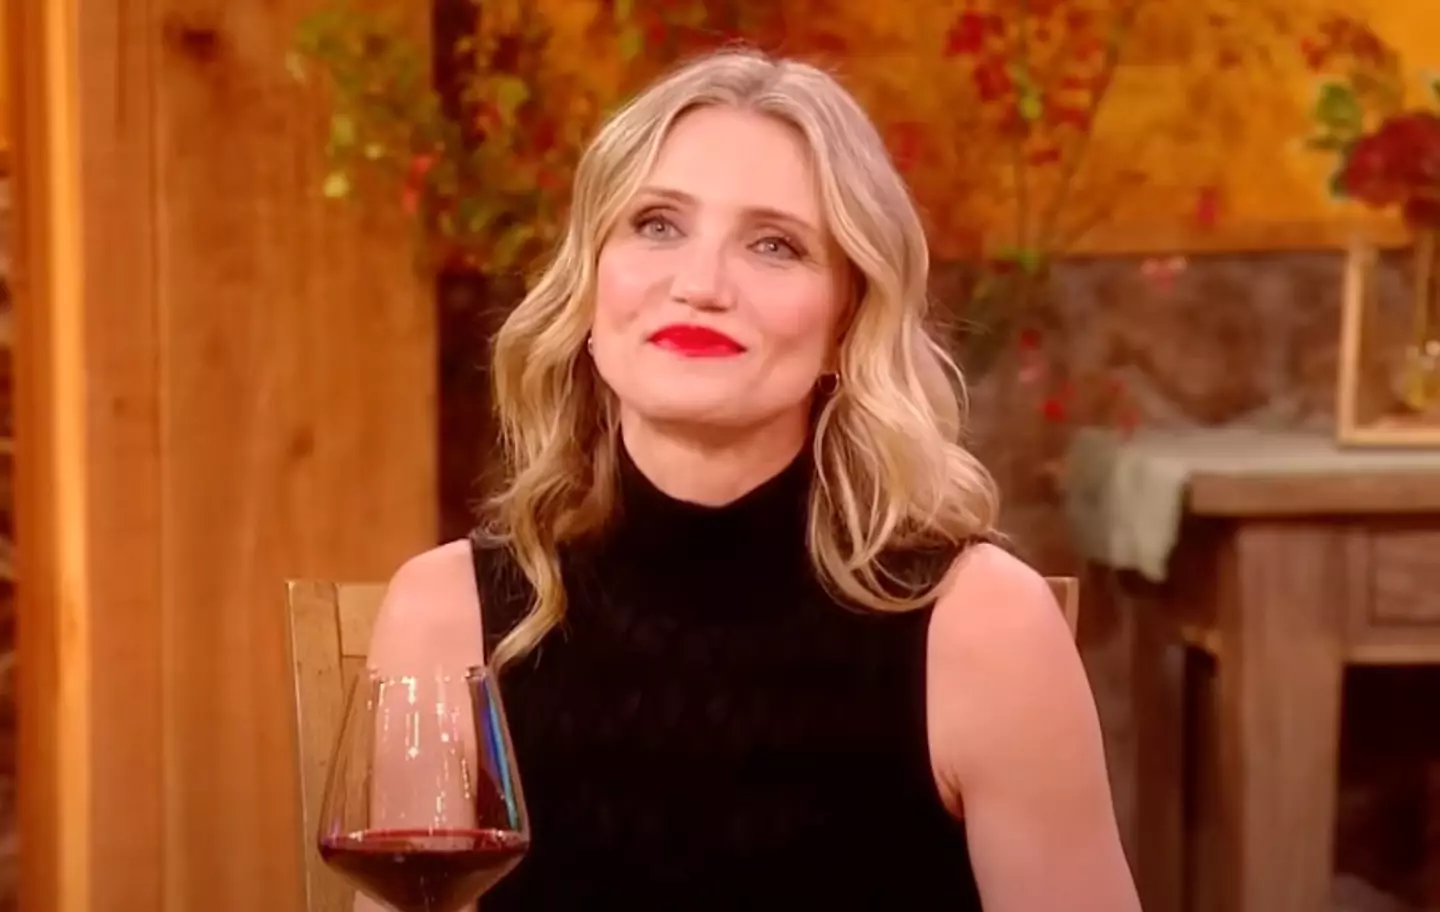 Hollywood star Cameron Diaz says she no longer thinks about her appearance since taking the decision to quit acting.